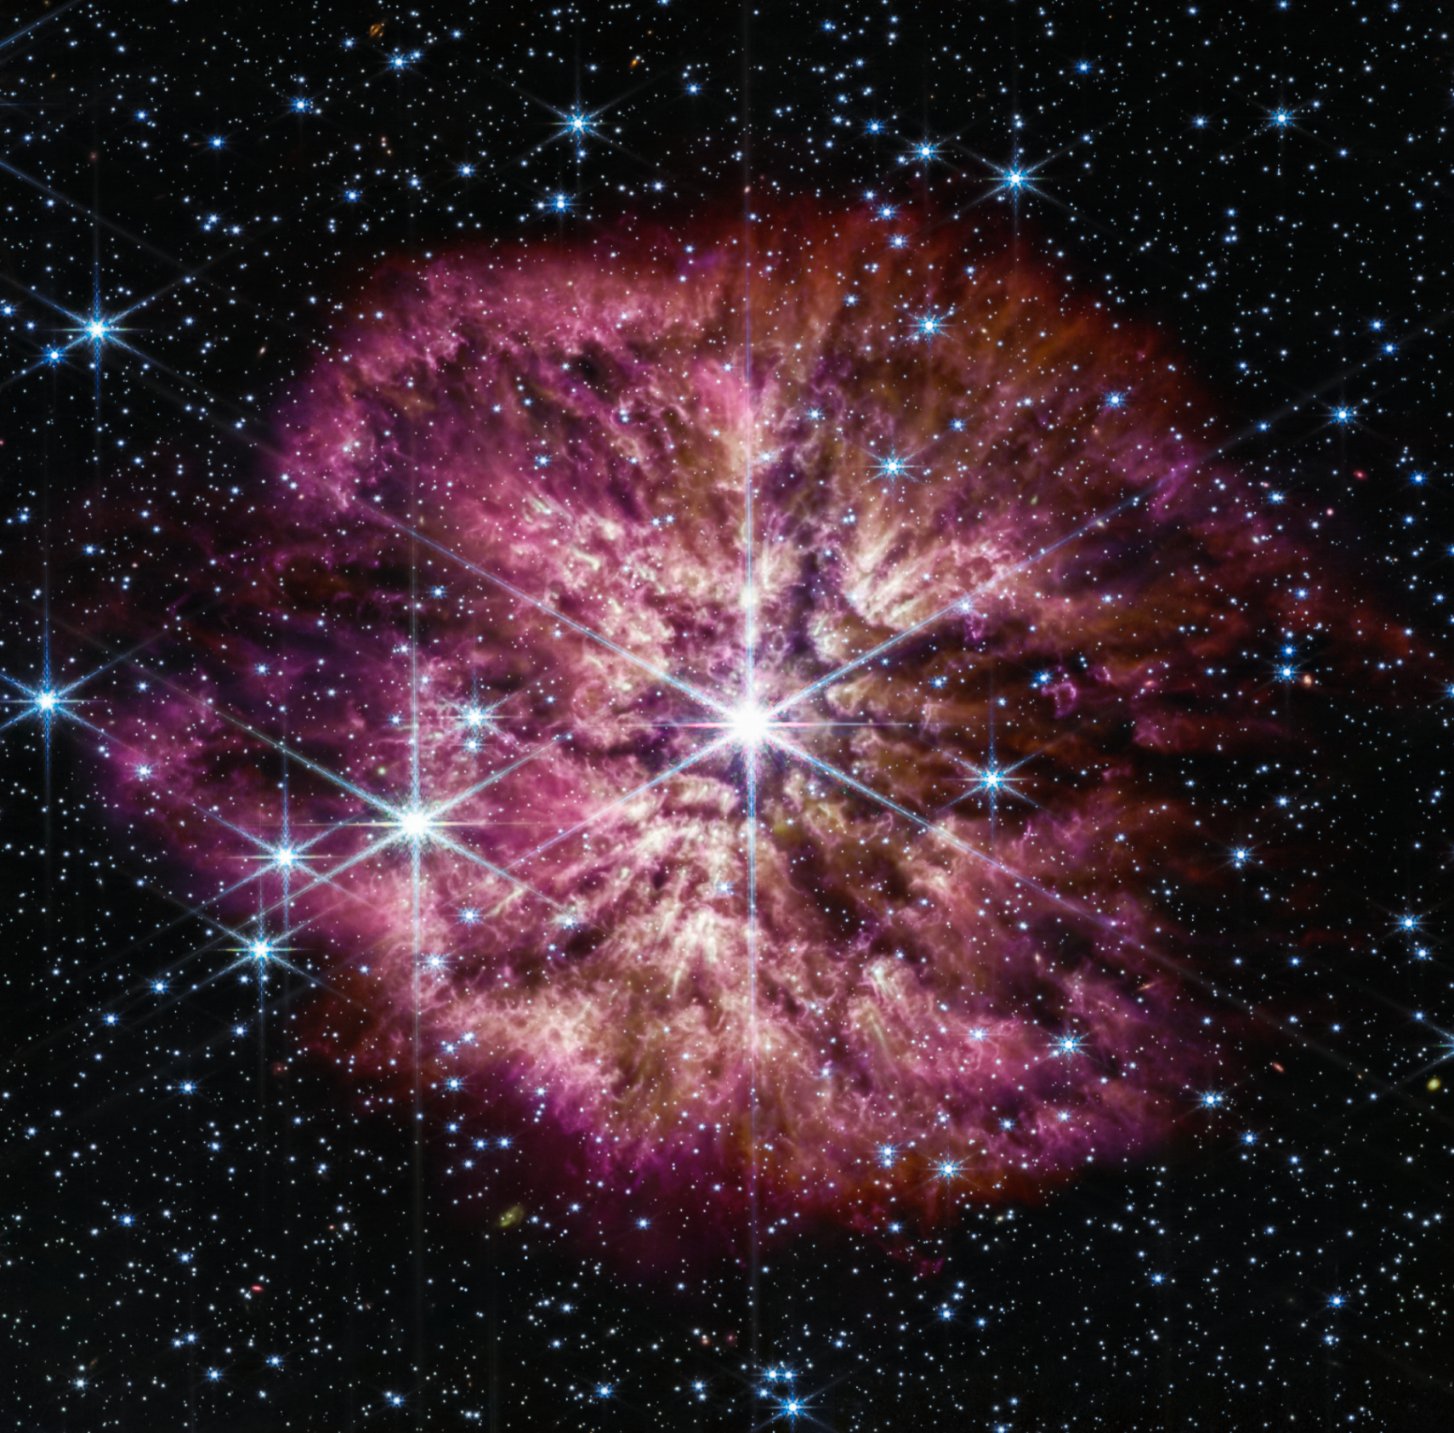 Image description: A prominent, eight-pointed star shines in bright white at the center of this image. A clumpy cloud of material surrounds this central star, with more material above and below than on the sides, in some places allowing background stars to peek through. The cloud material is a dark yellow closer to the star, and turns a pinkish purple at its outer edges. Combined together, the central star and its cloud resemble the delicate petals of a cherry blossom. The black background features many smaller white stars scattered throughout.